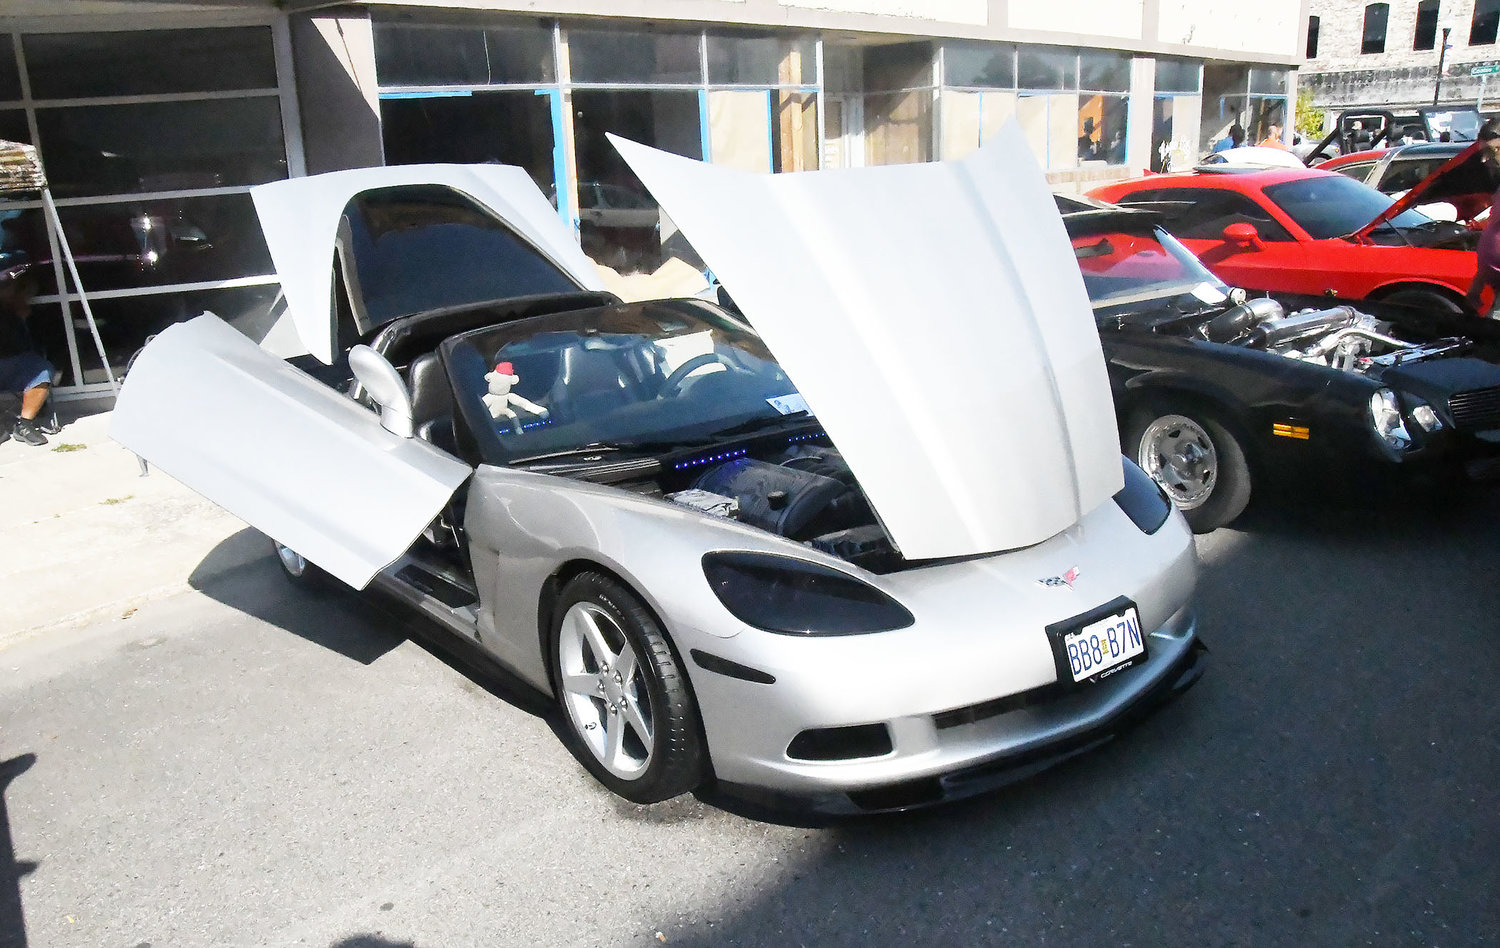 Marcus Brown's 2005 Corvette earned third place in its division.